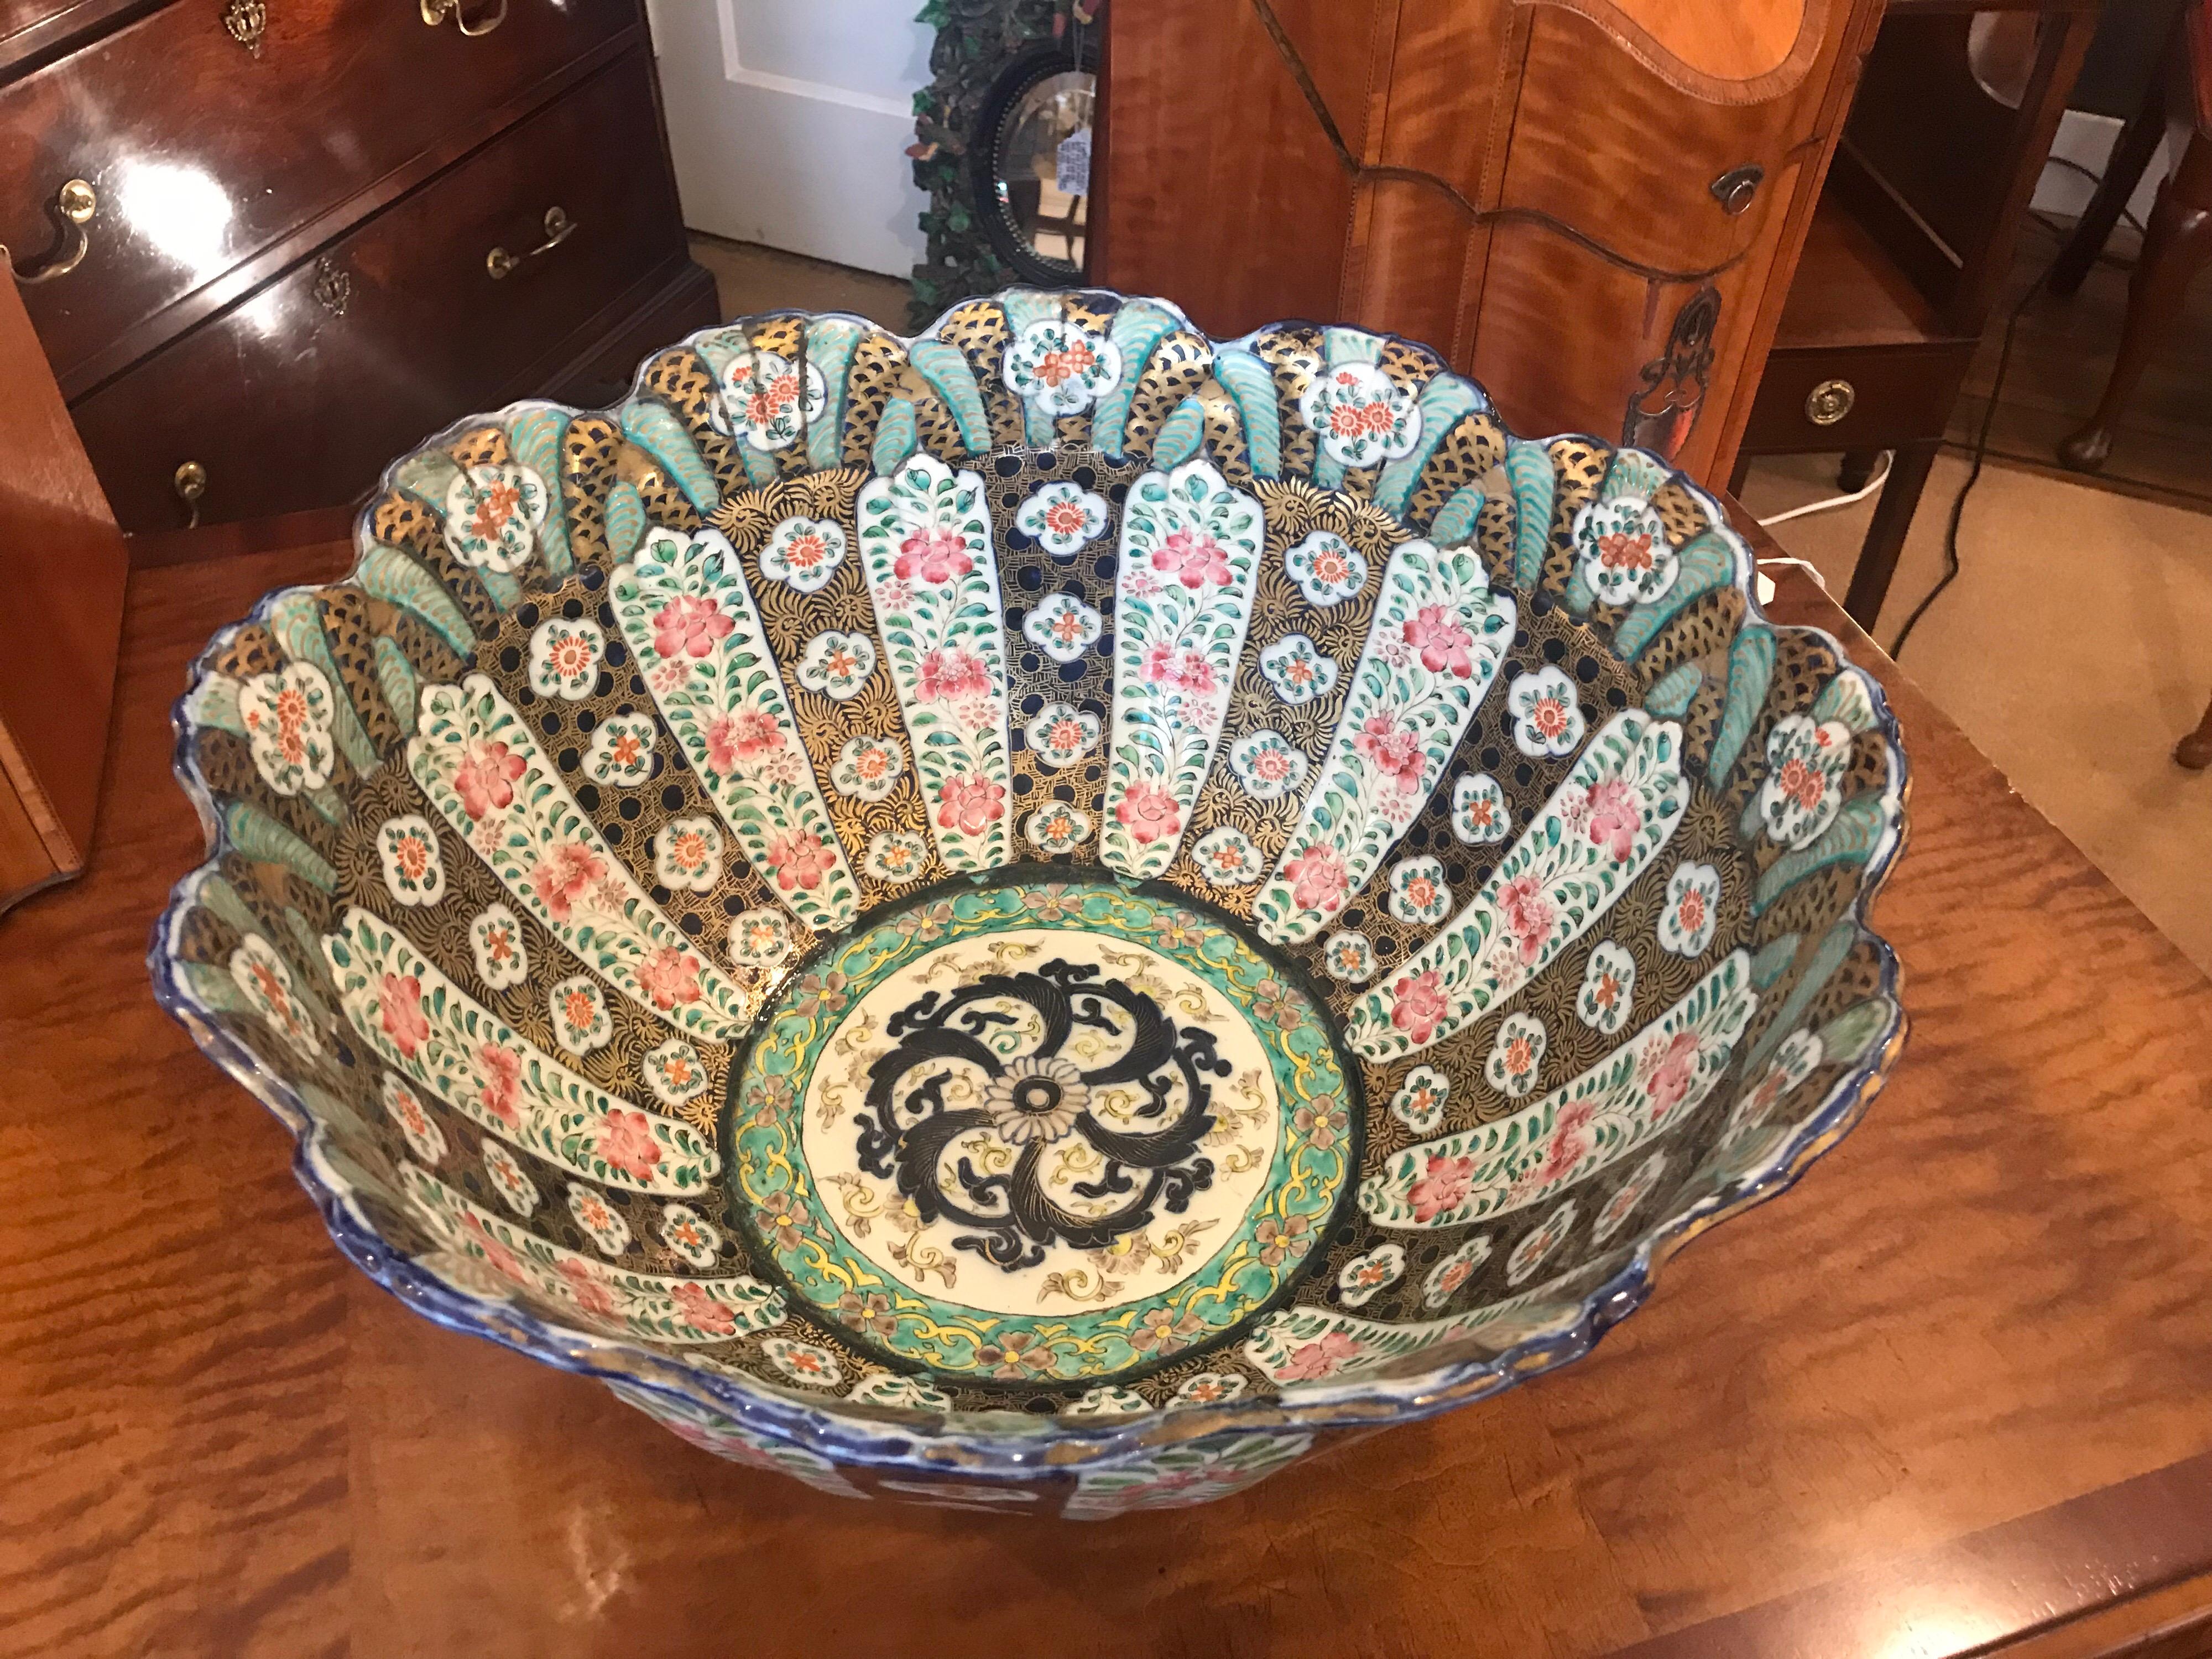 Large hand painted porcelain Japanese Imari punch bowl. The scalloped edge with white background porcelain with cobalt, pink, green hand painted pattern with all-over gilt highlights. A large and impressive 19th century porcelain bowl with an